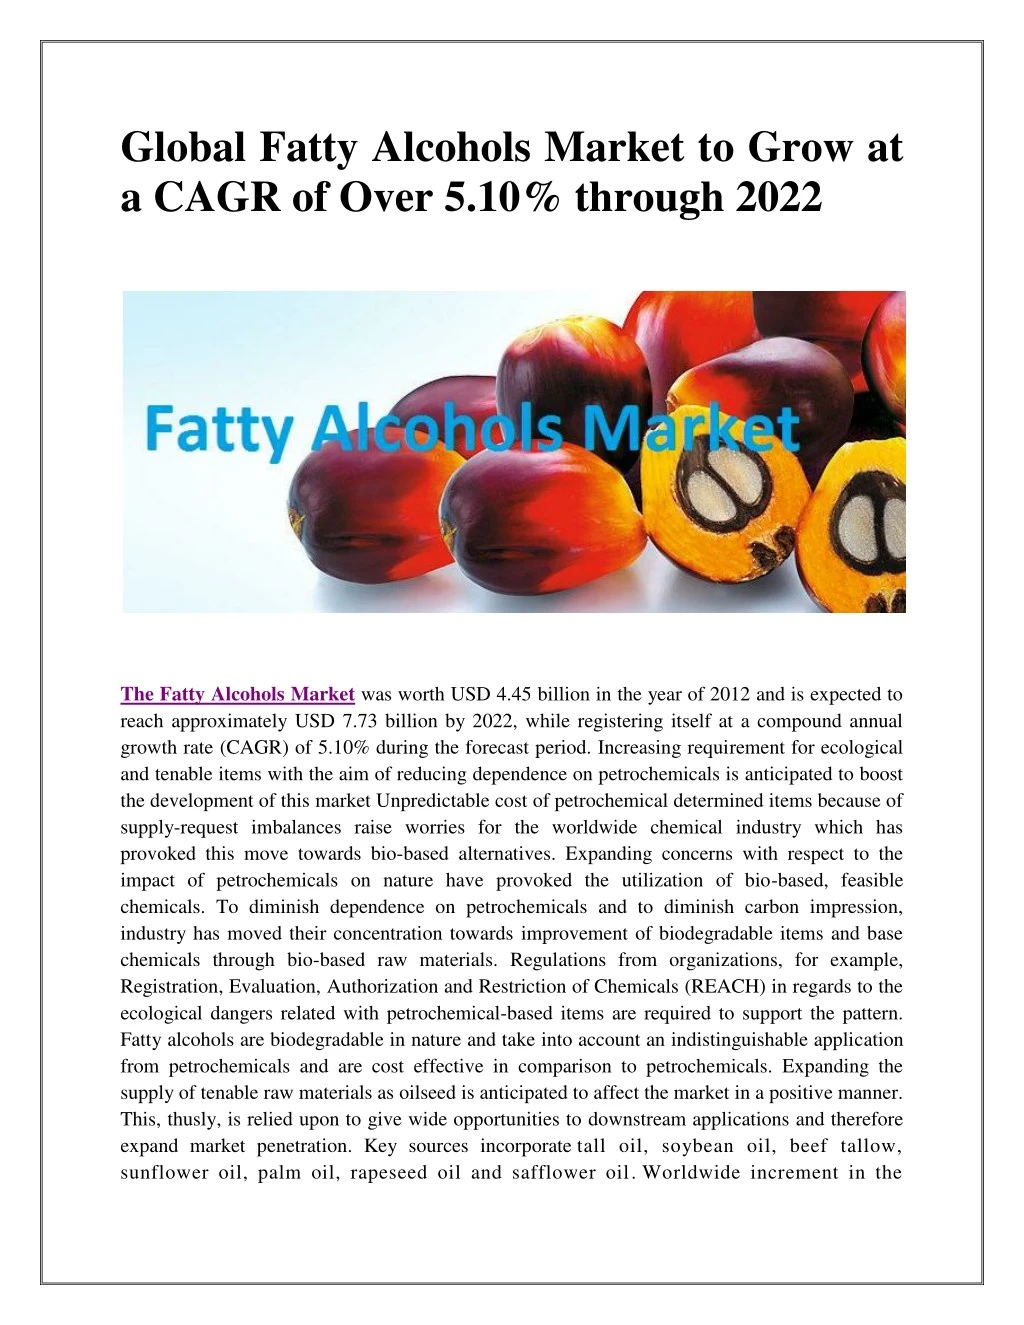 global fatty alcohols market to grow at a cagr